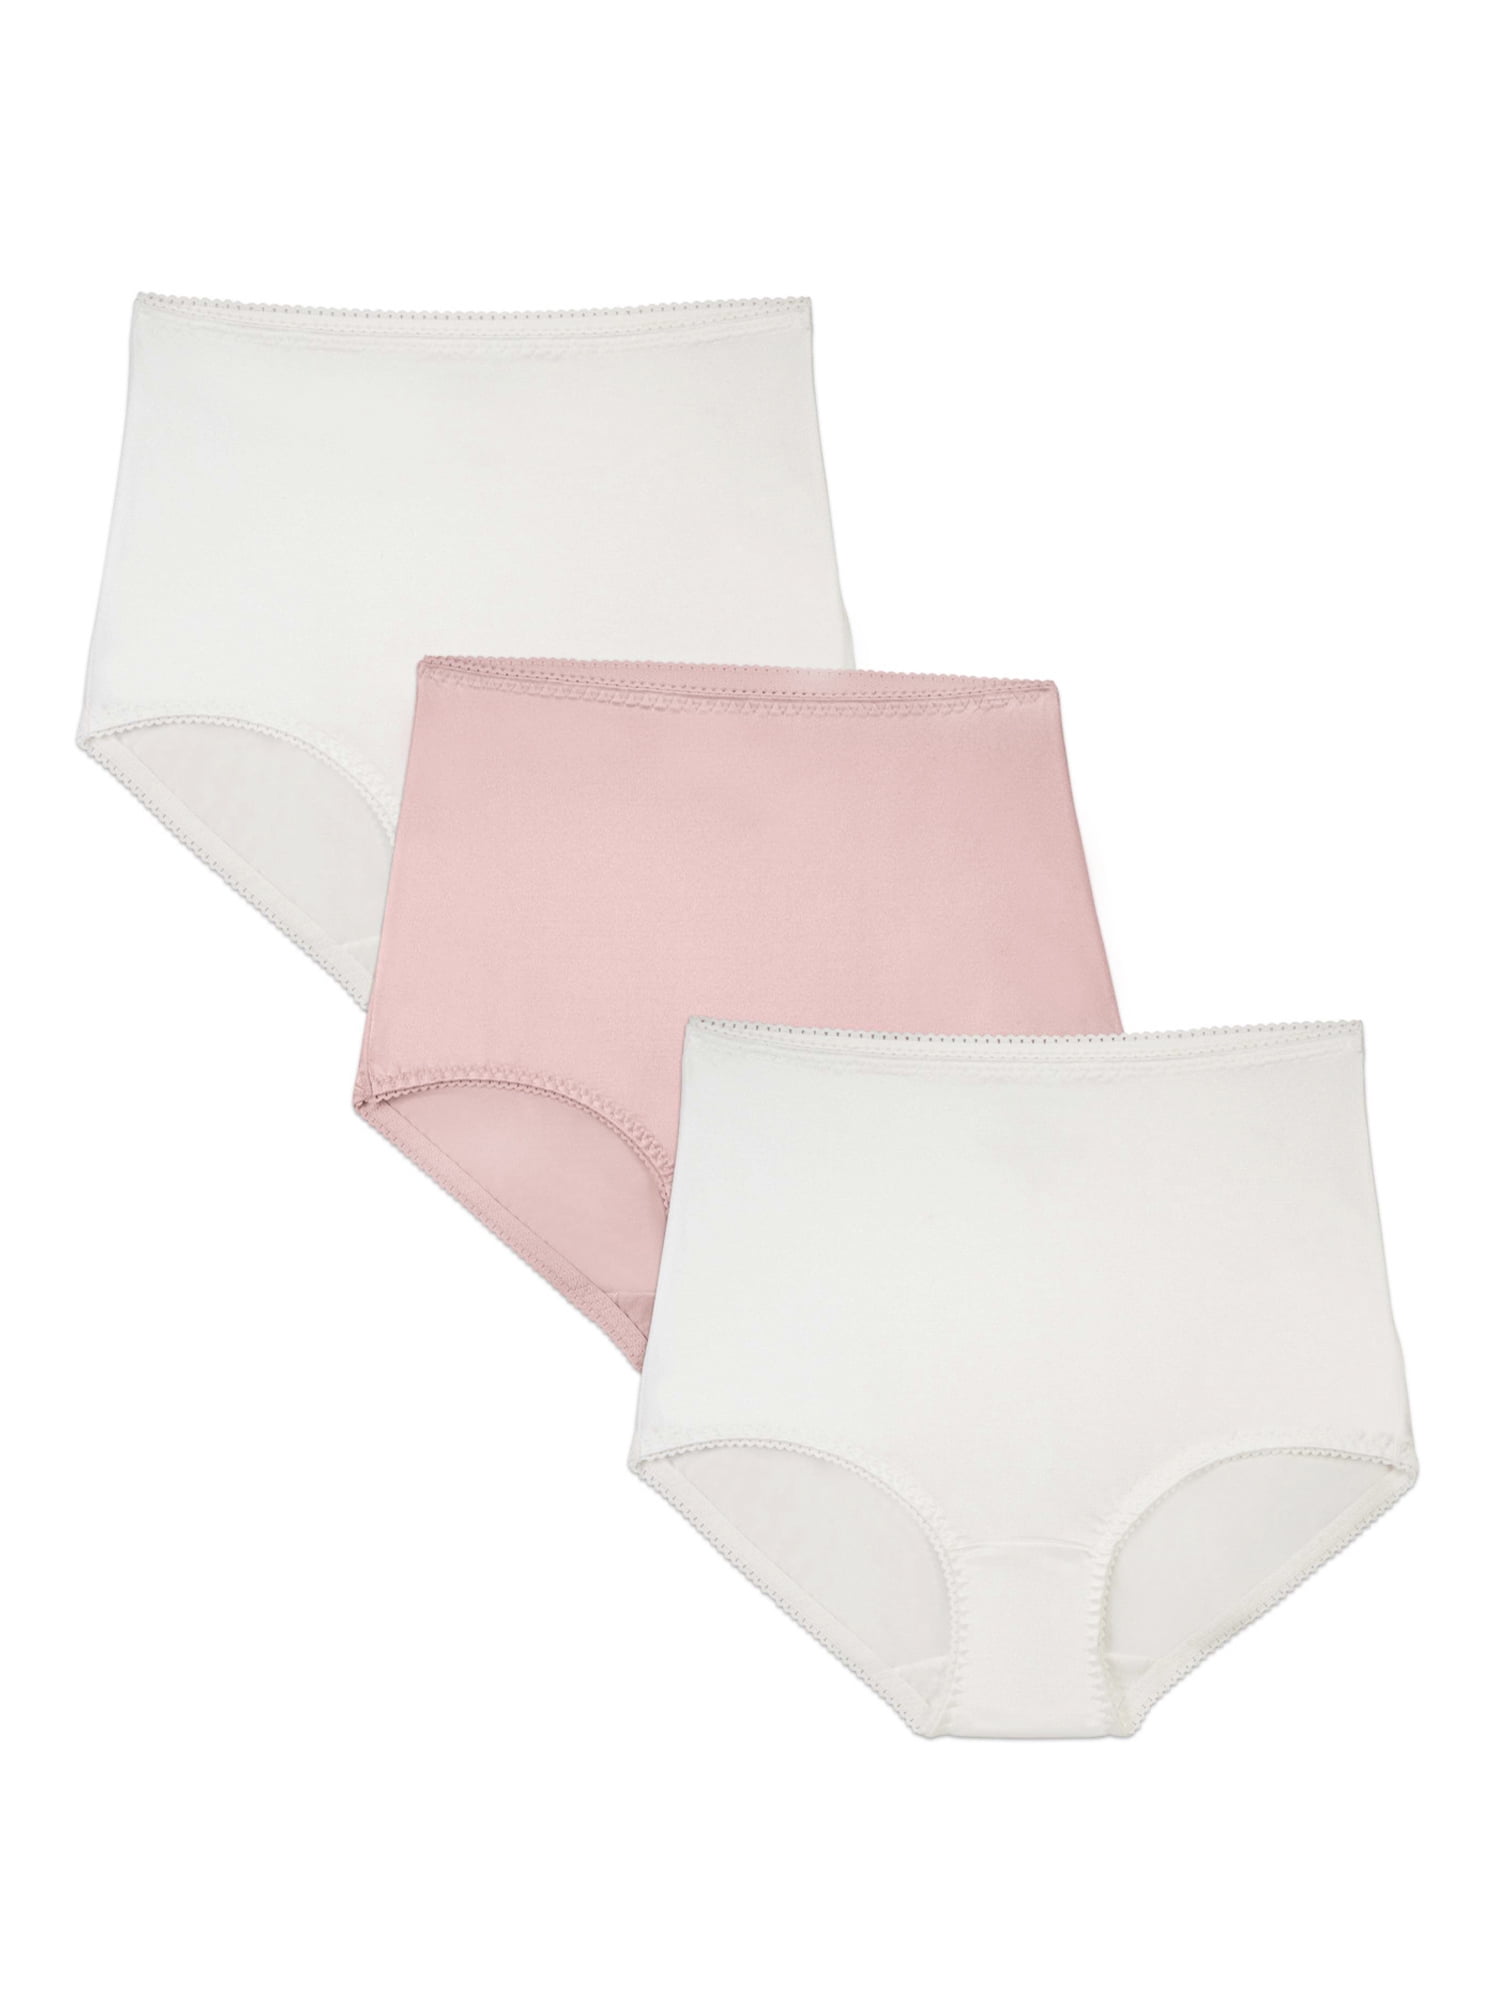 Vanity Fair Radiant Collection Women's Light and Luxe Brief